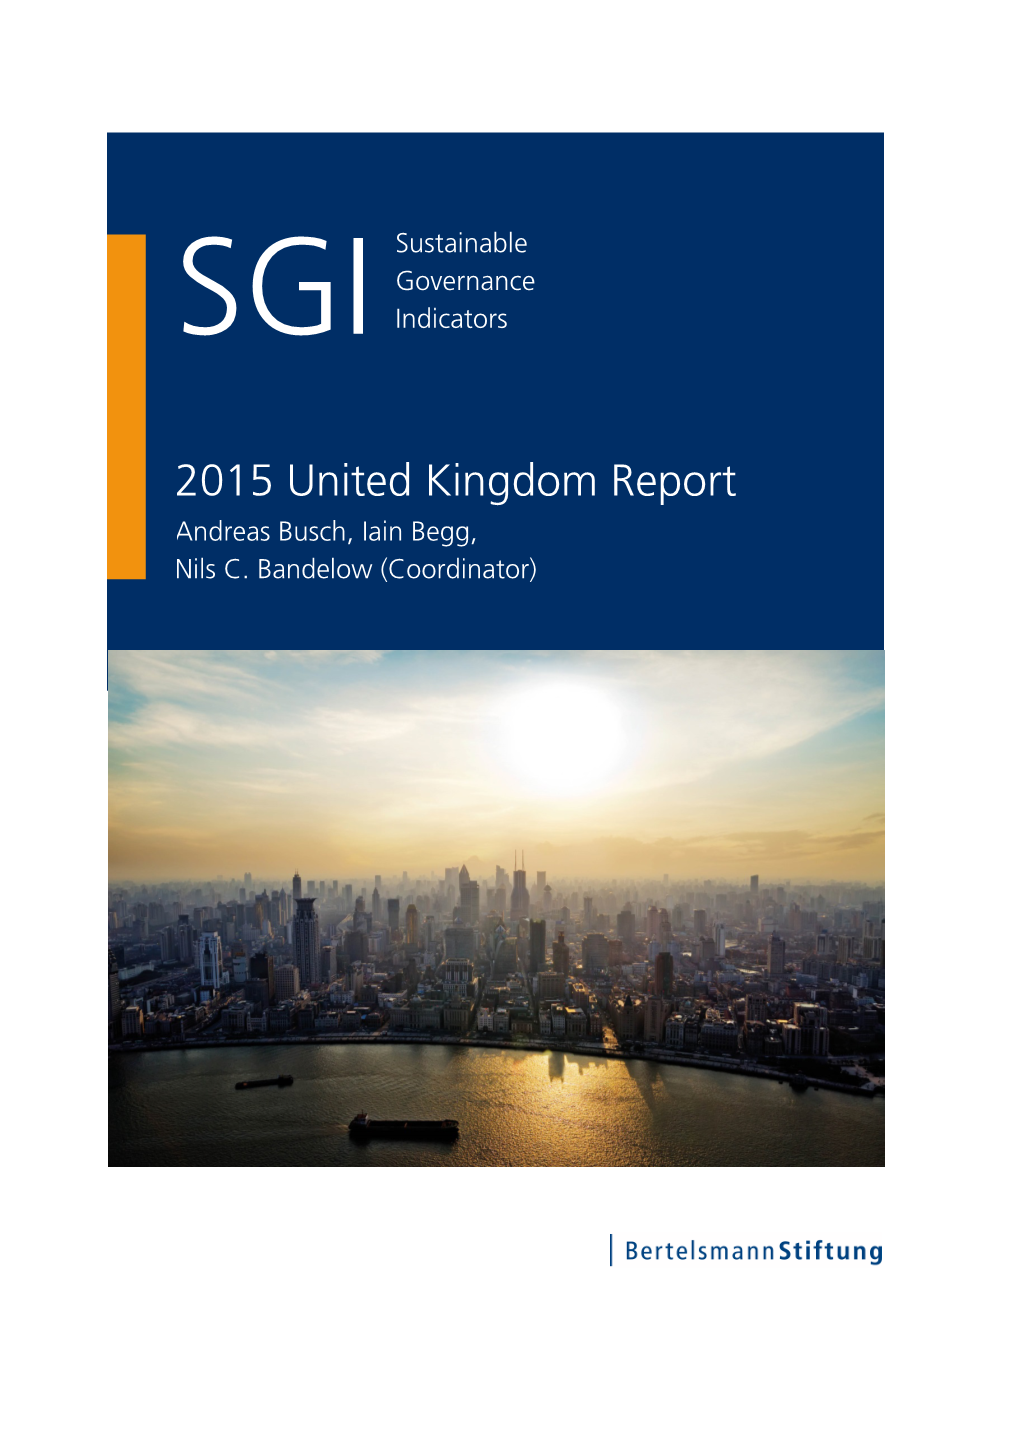 2015 United Kingdom Country Report | SGI Sustainable Governance